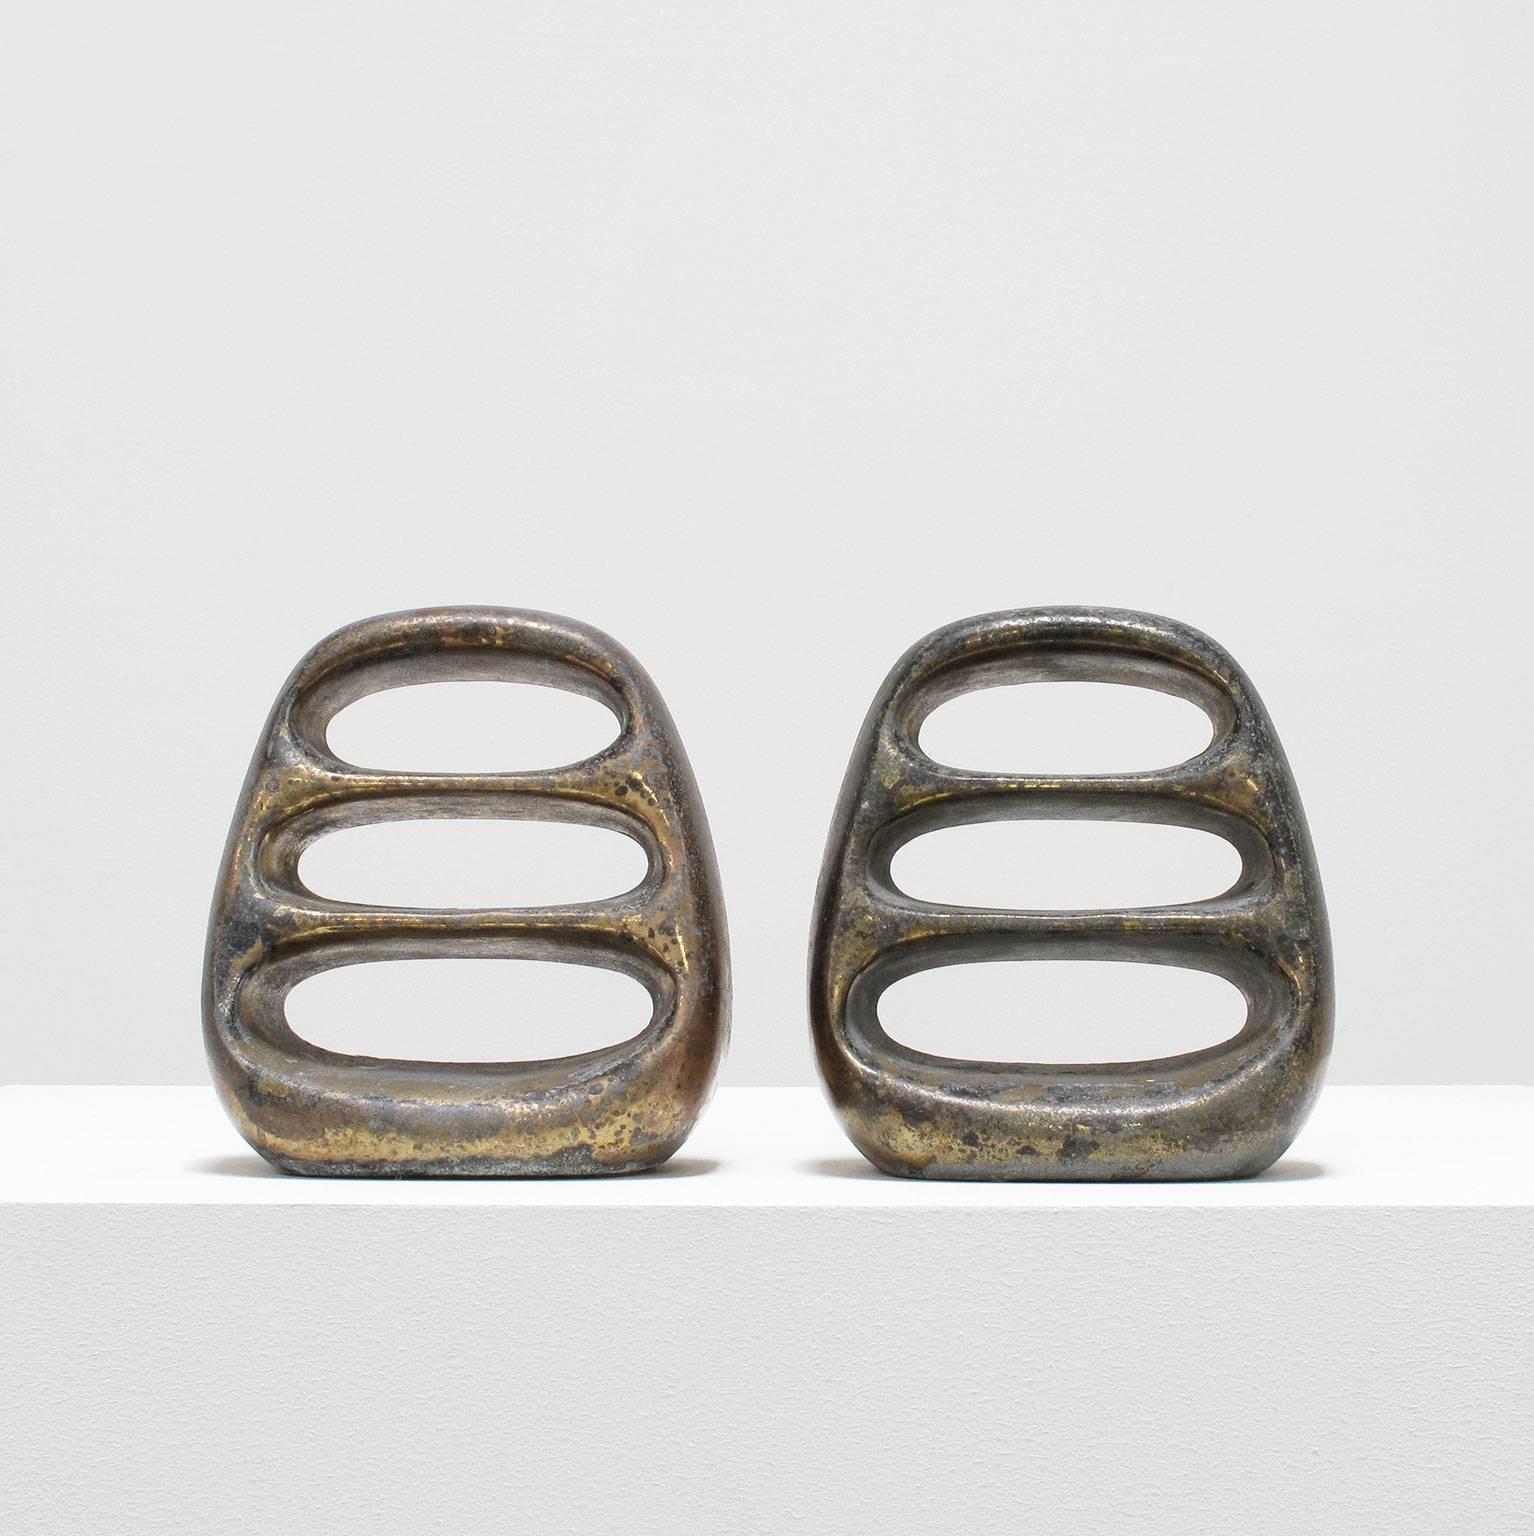 Designed by Ben Seibel and made by Jenfred Ware, New York, 1950s, a pair of bookends in brass plated cast metal displaying heavily patinated surfaces as if they were cast into the salty fathoms of the bay, similar to the Flame Collection Chair